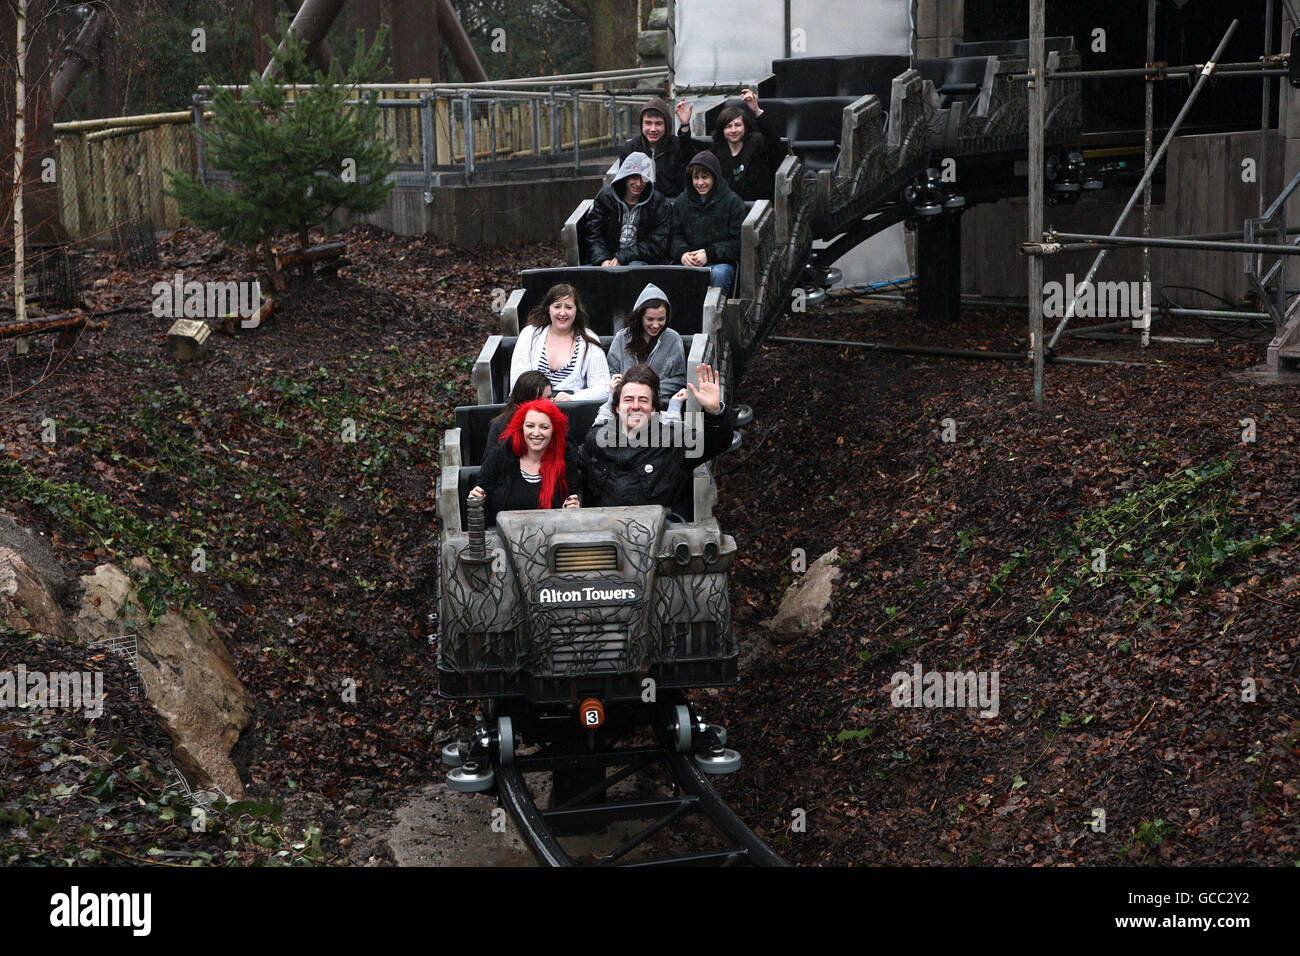 Jonathan Ross and wife Jane Goldman ride the world's first free fall drop rollercoaster, Th13teen, which opened to the public on Saturday March 20, at Alton Towers, Staffordshire. Stock Photo